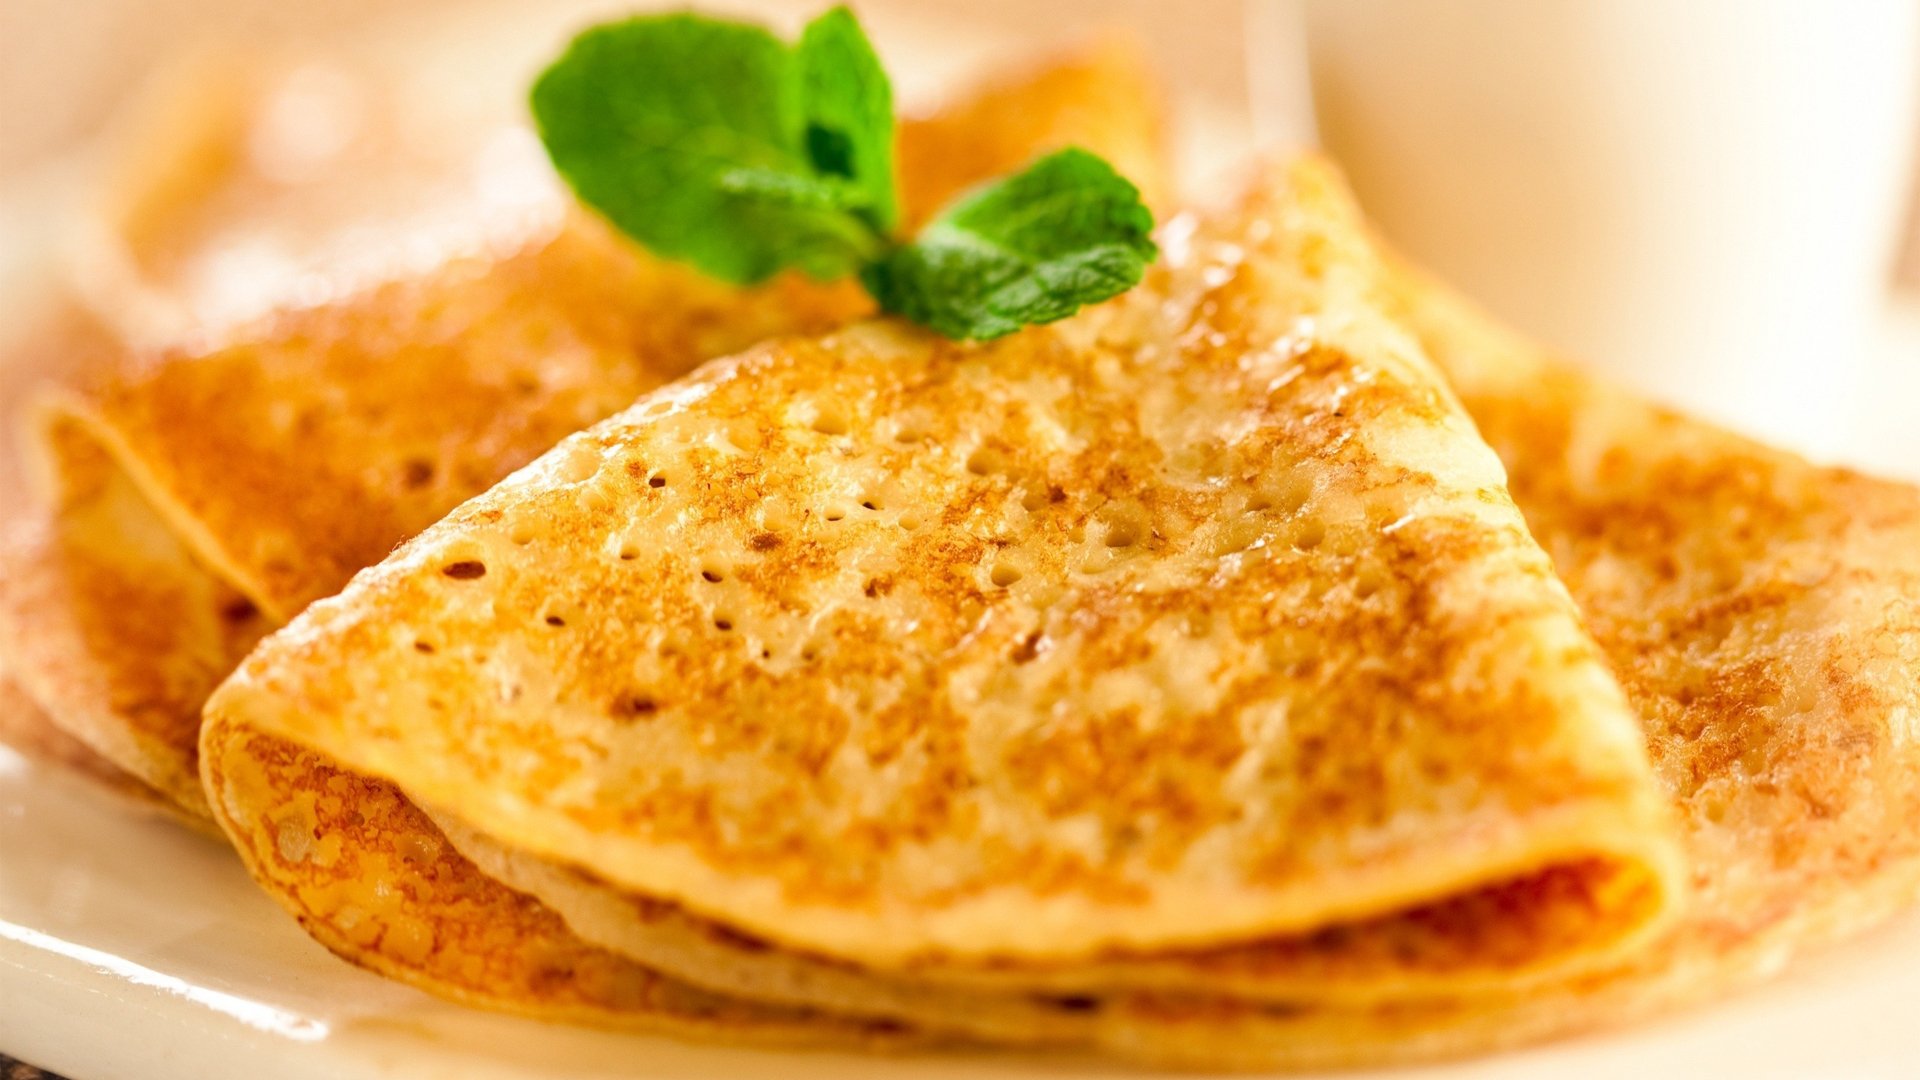 Roti vs bread for weight loss: What's healthier for you? | HealthShots